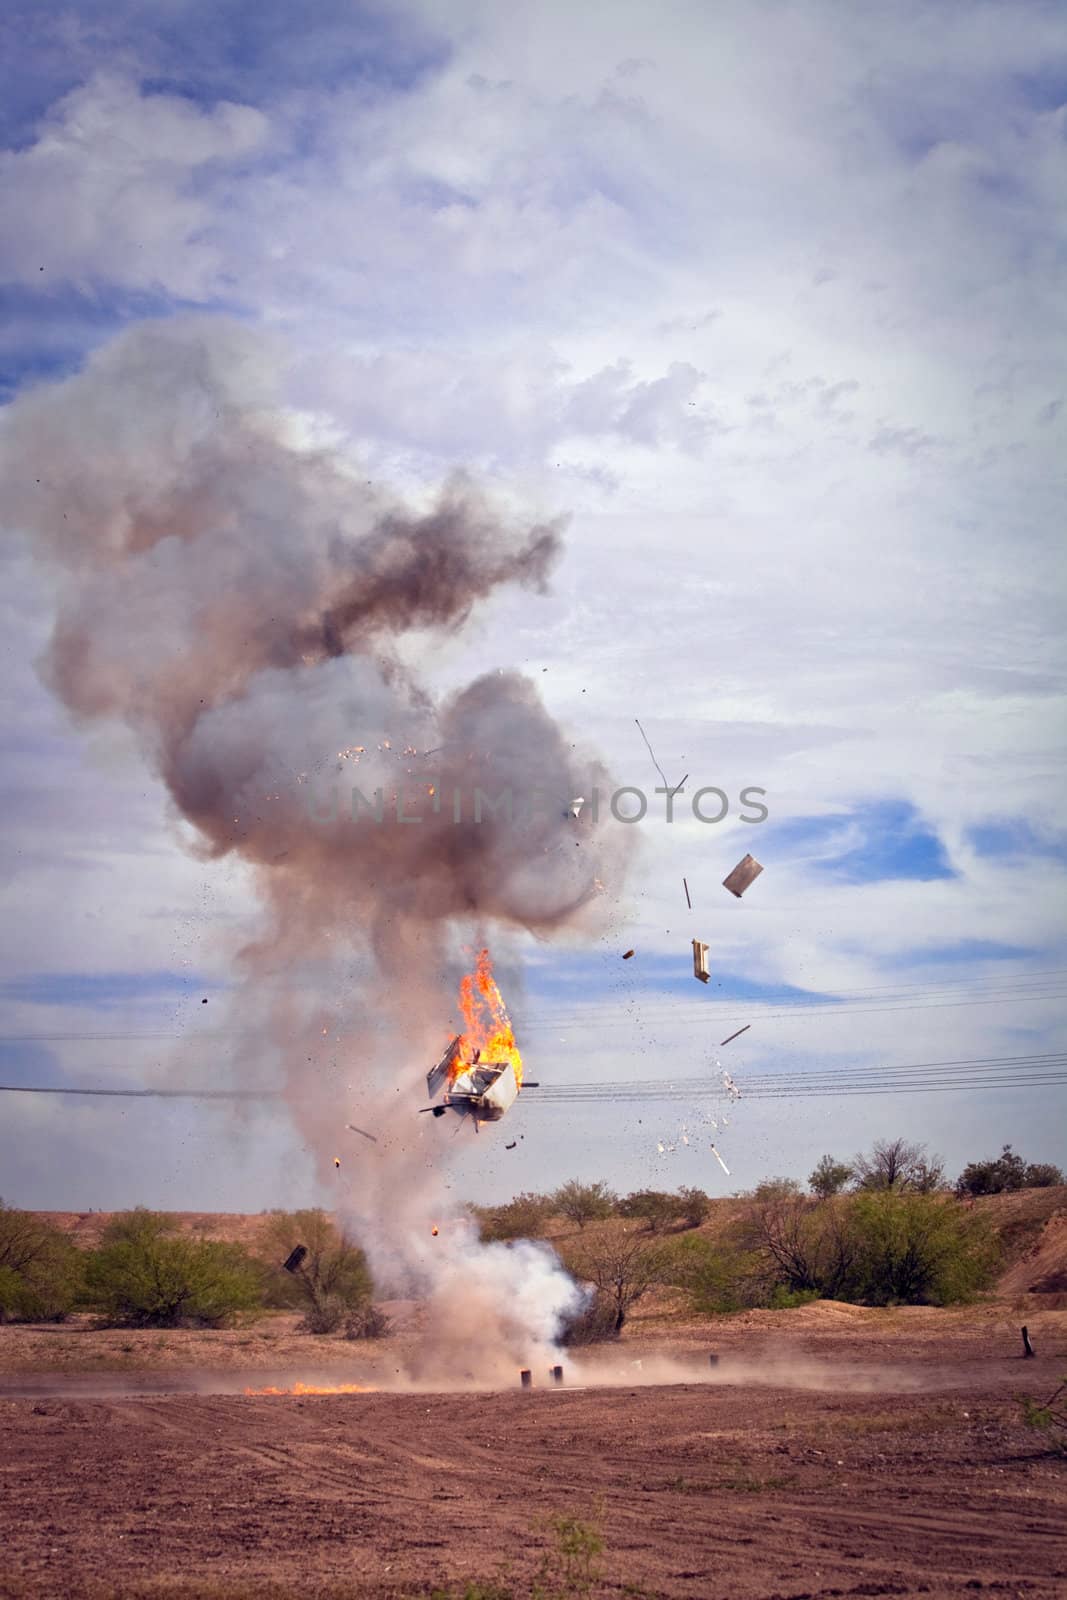 Movie special effects exploding appliance in a desert